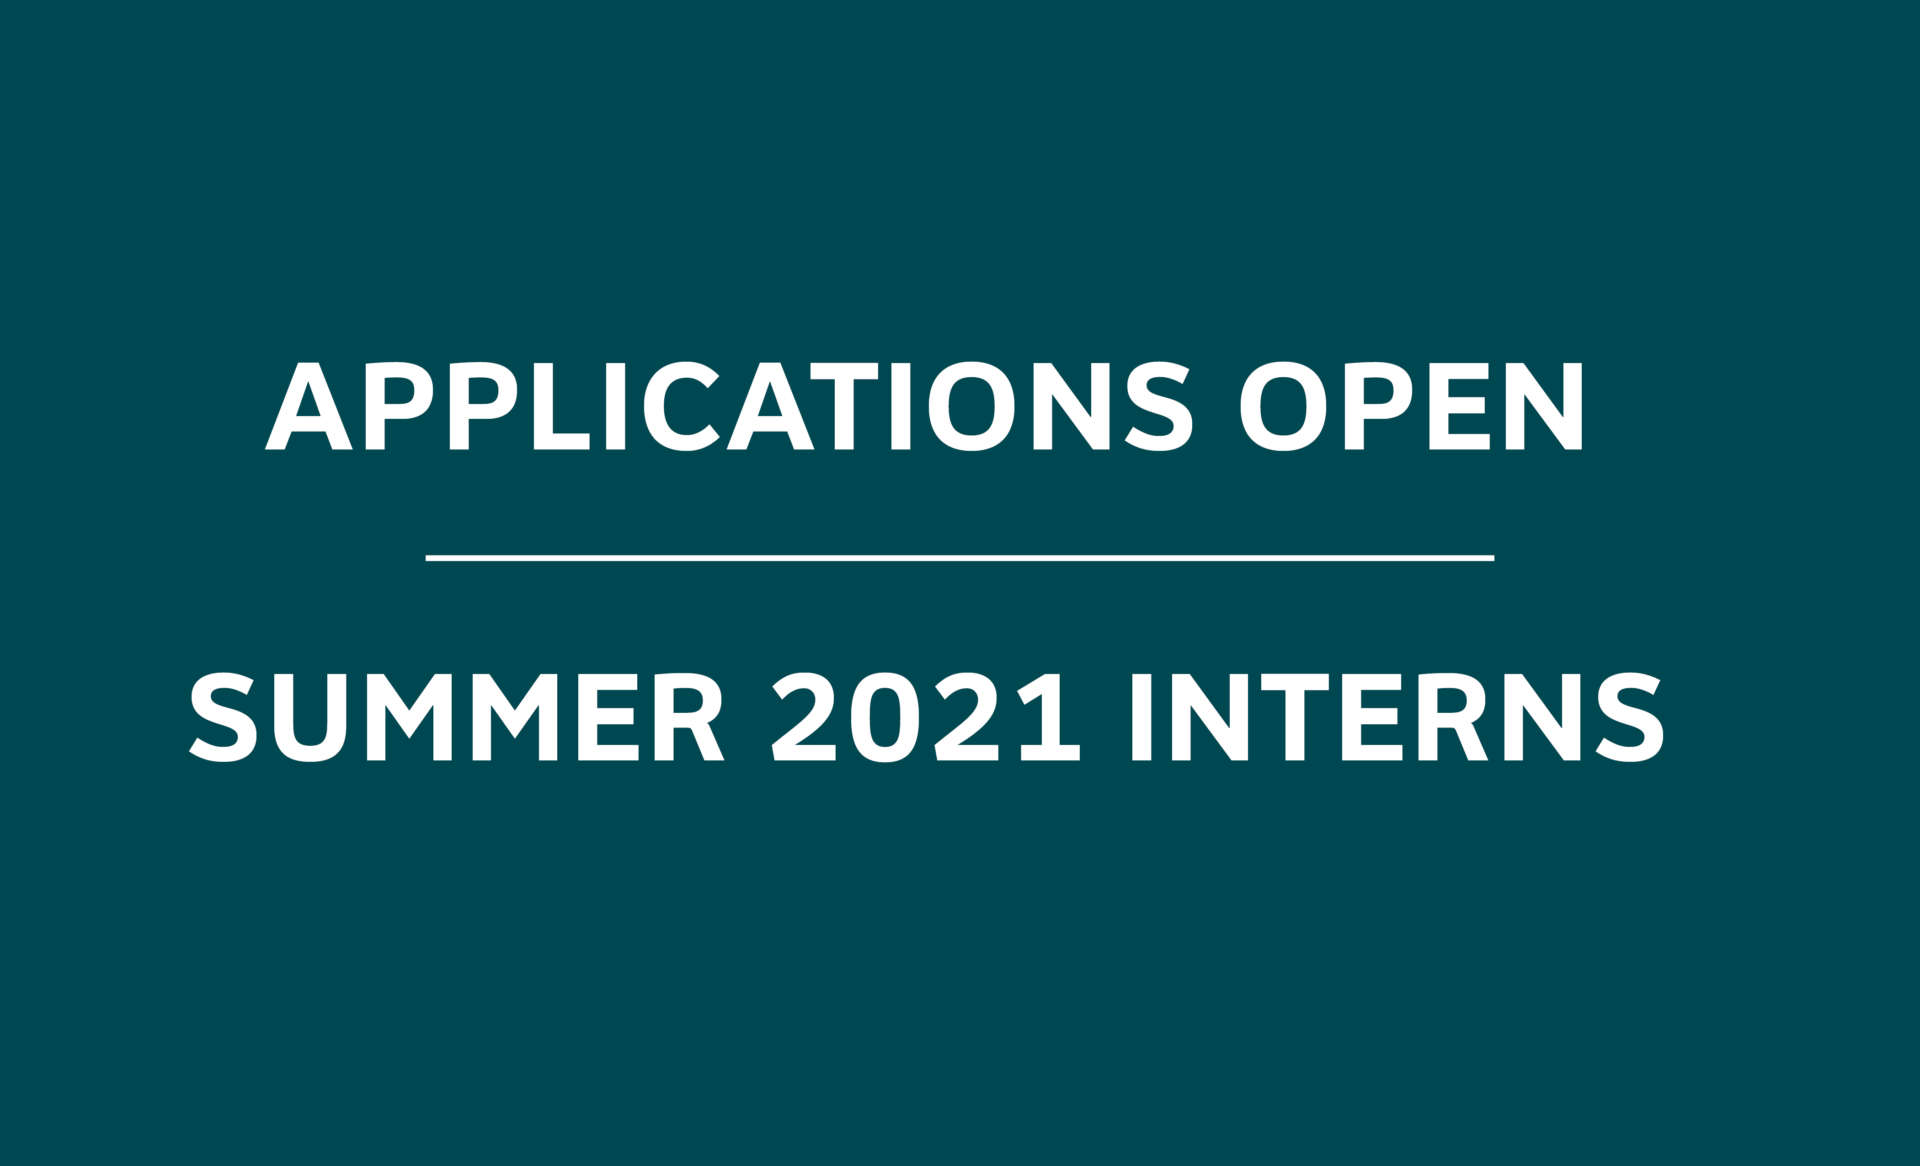 Applications open for Summer 2021 internships at SCAPE SCAPE